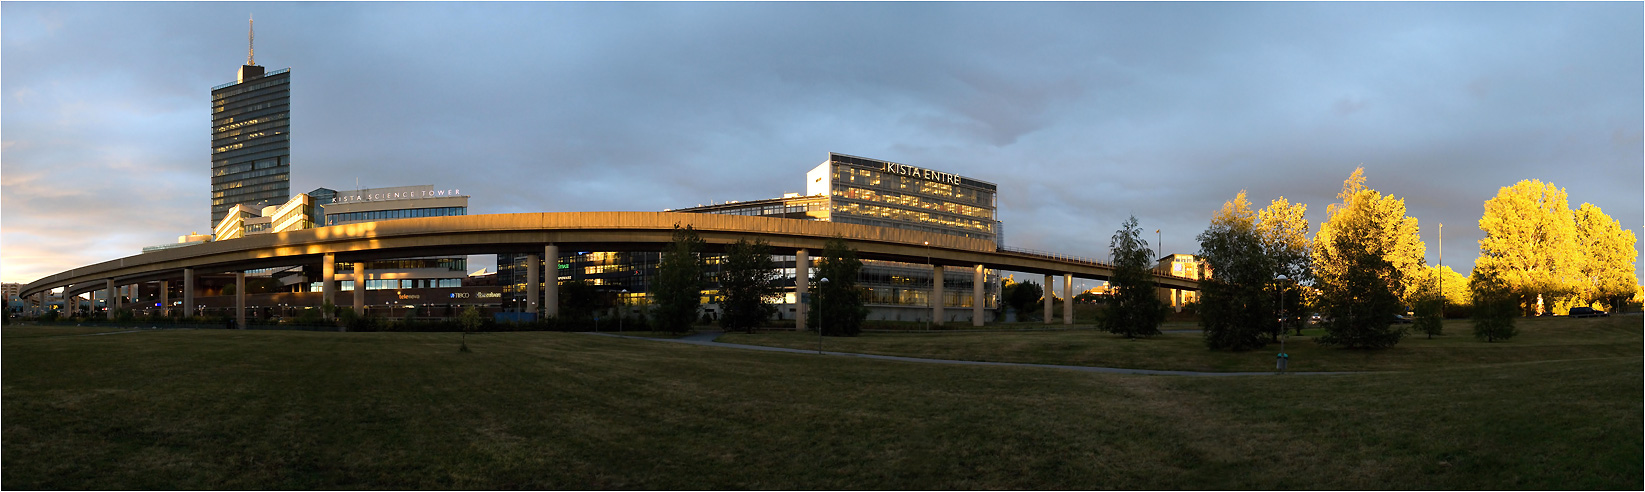 Kista Science Tower